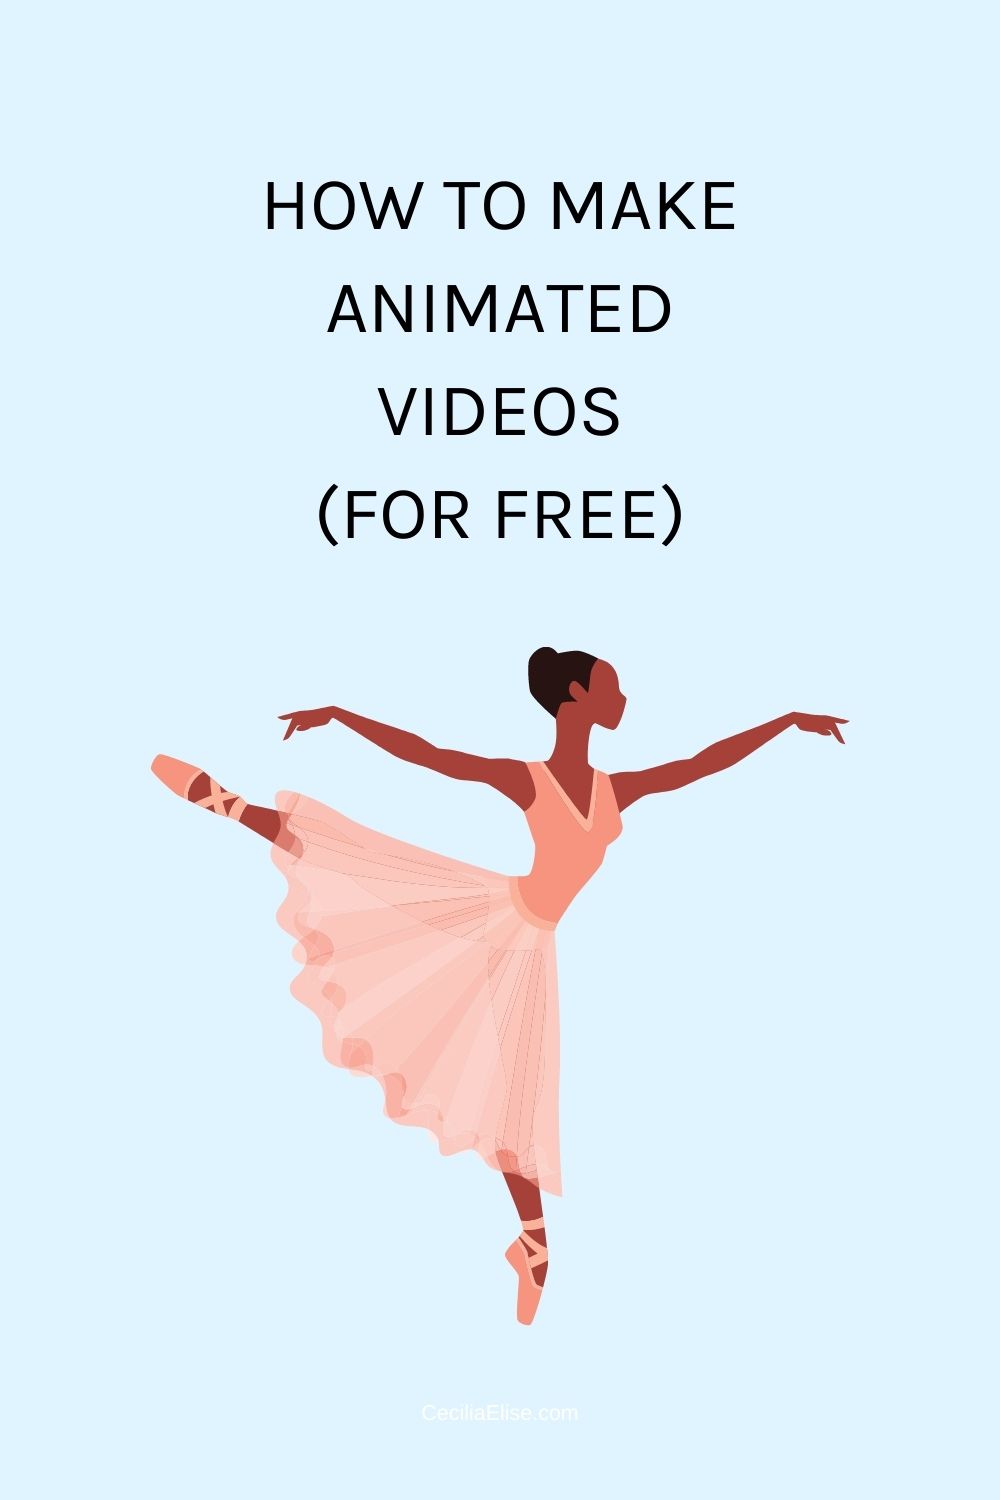 HOW-TO-MAKE-ANIMATED-VIDEOS-for-free